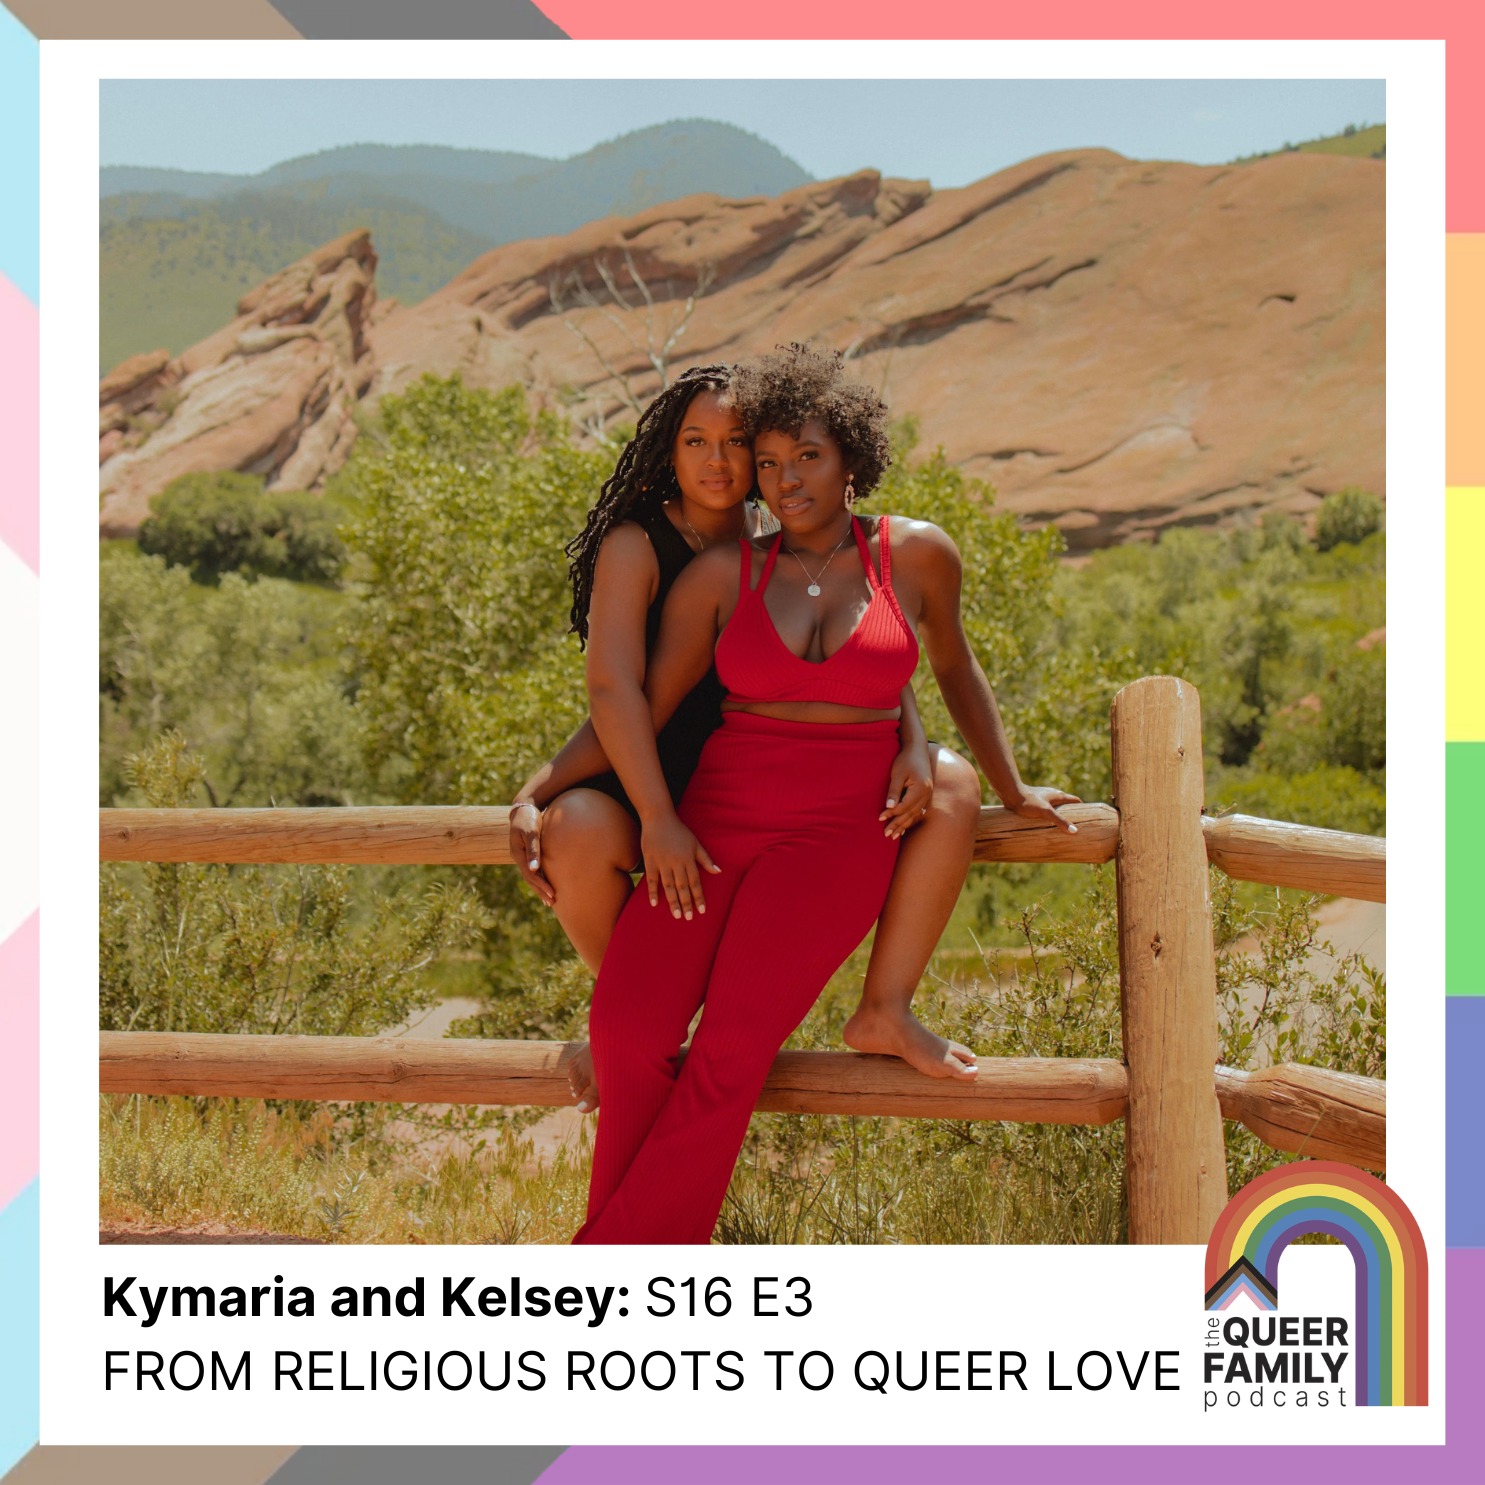 From Religious Roots to Queer Love – Coming Out, Blending Families, and Living Our Truth